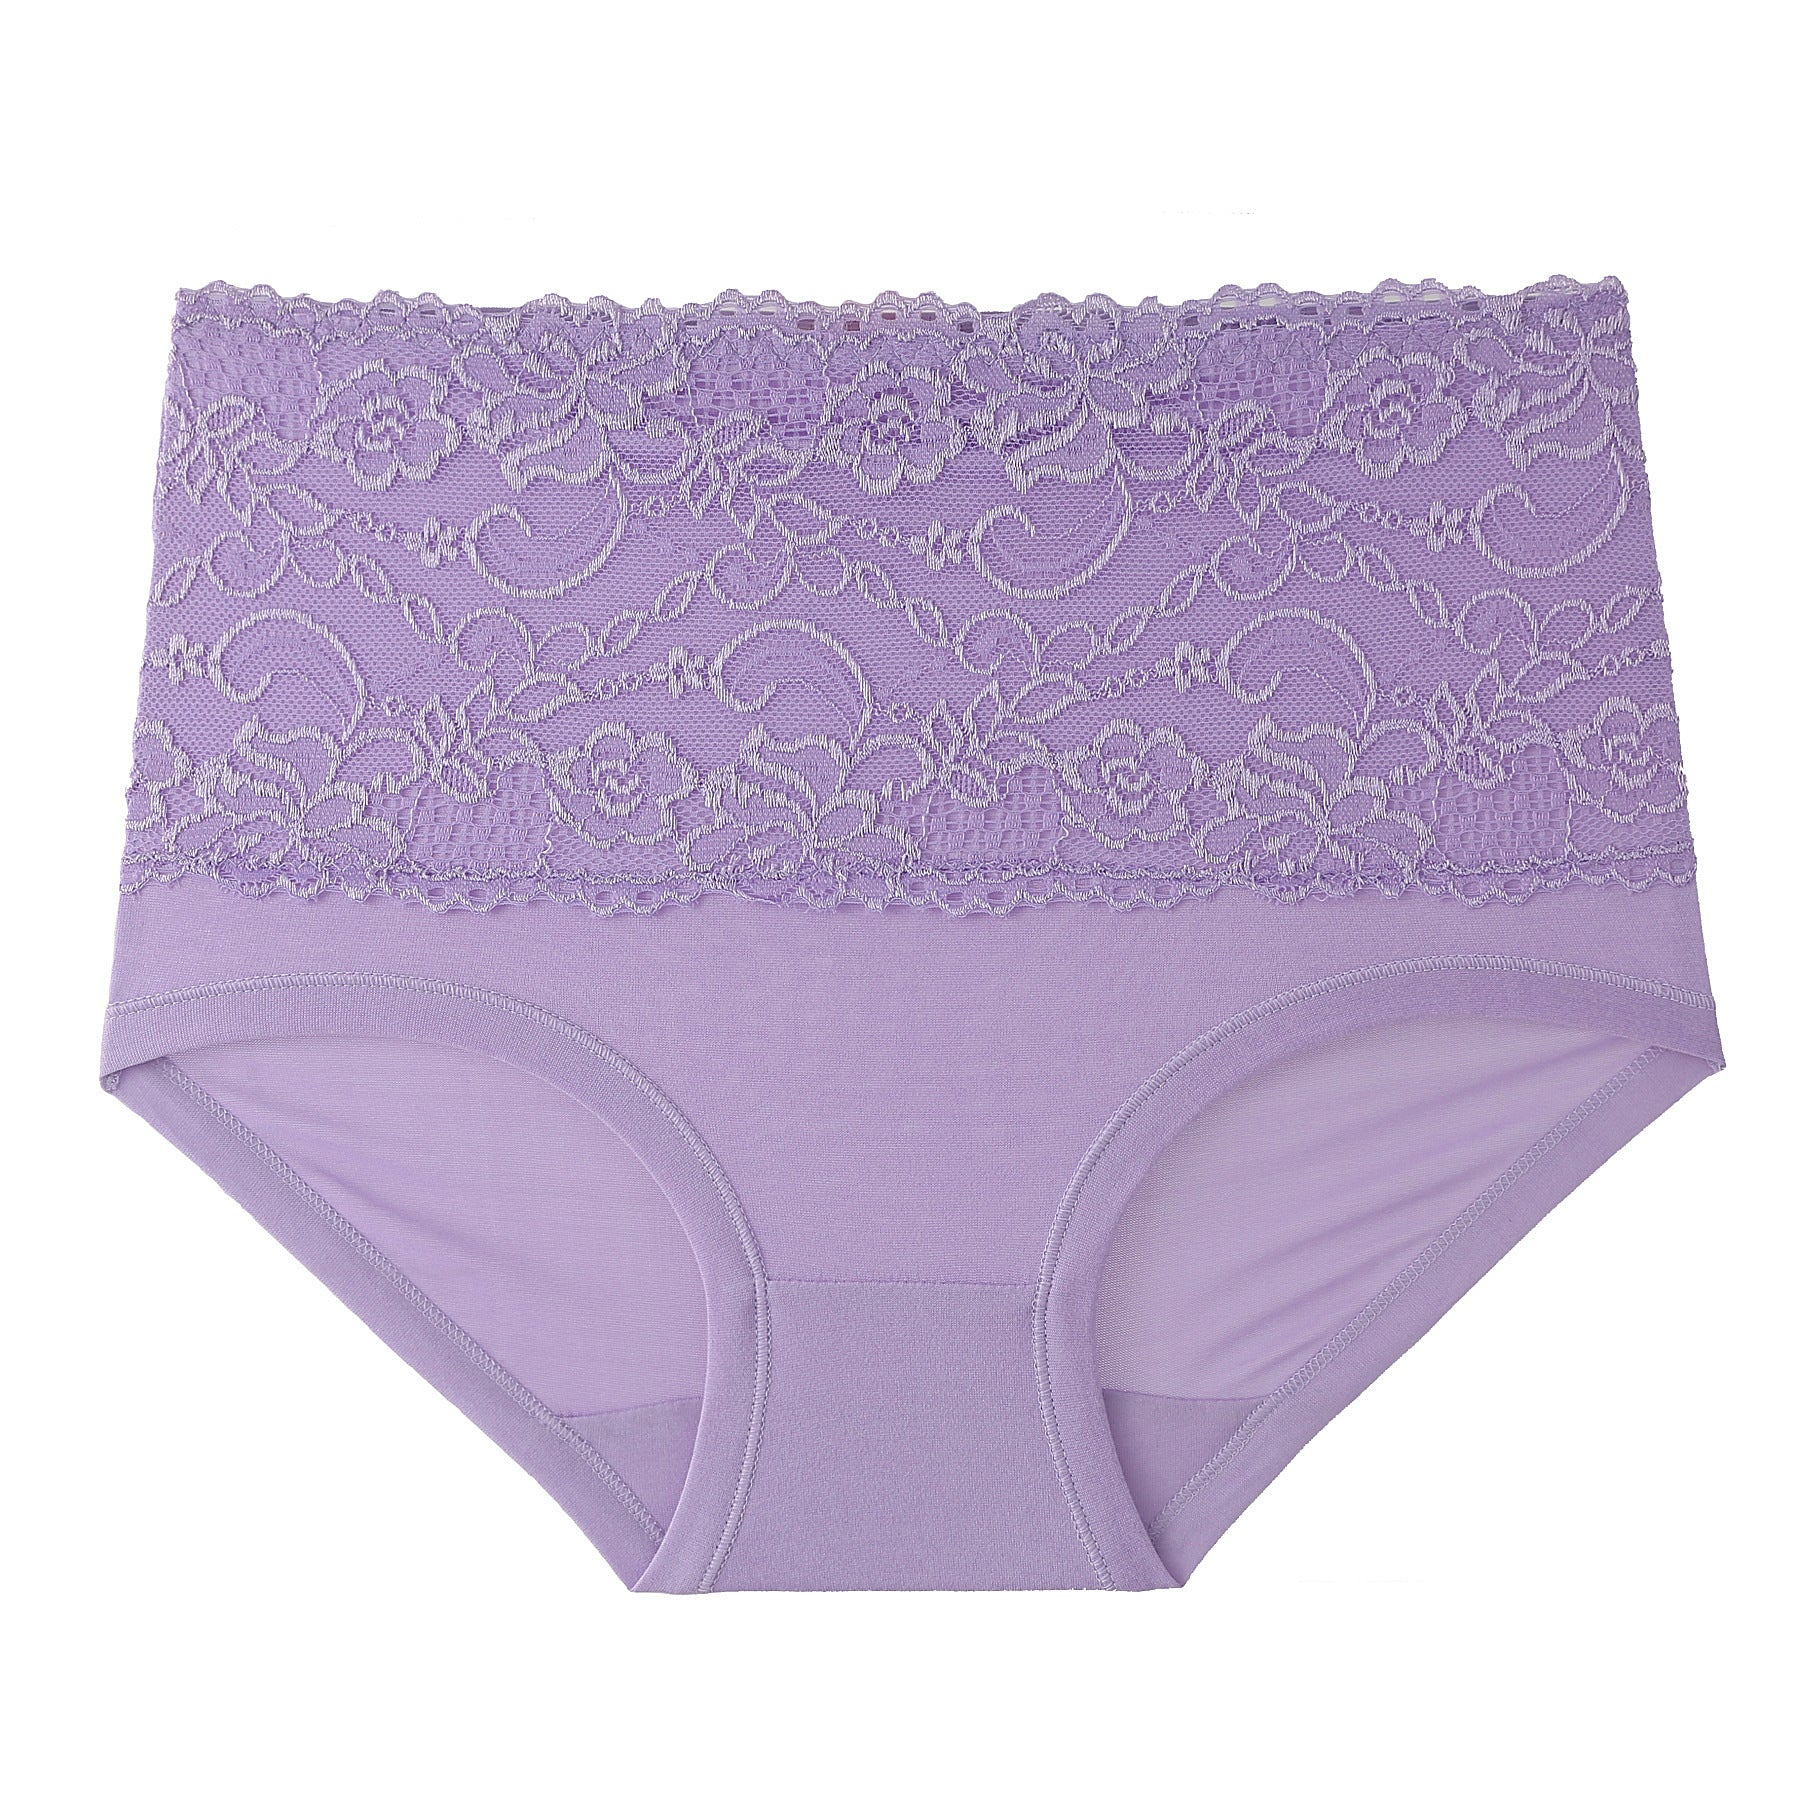 Reversible Panty Body Form Pyramid – Fixtures Close Up